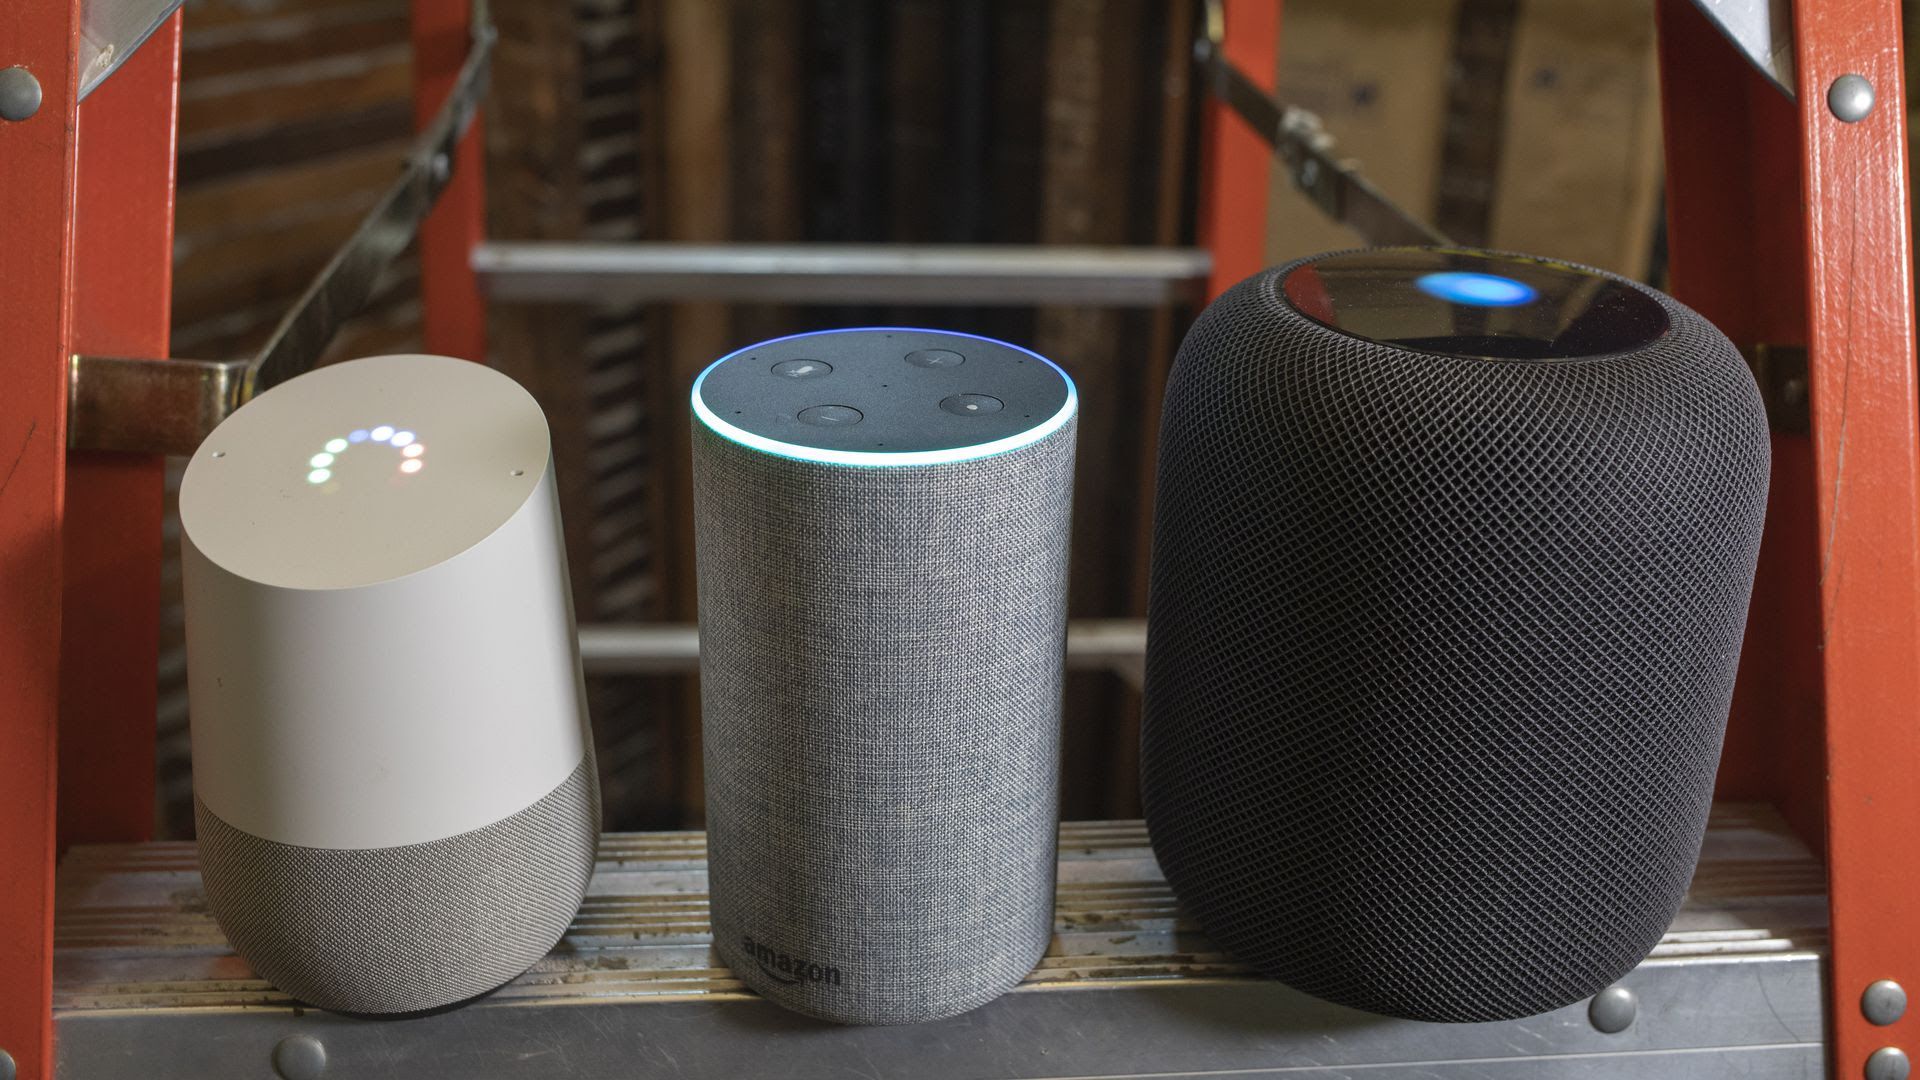 3 smart speakers from tech giants Google, Amazon and Apple